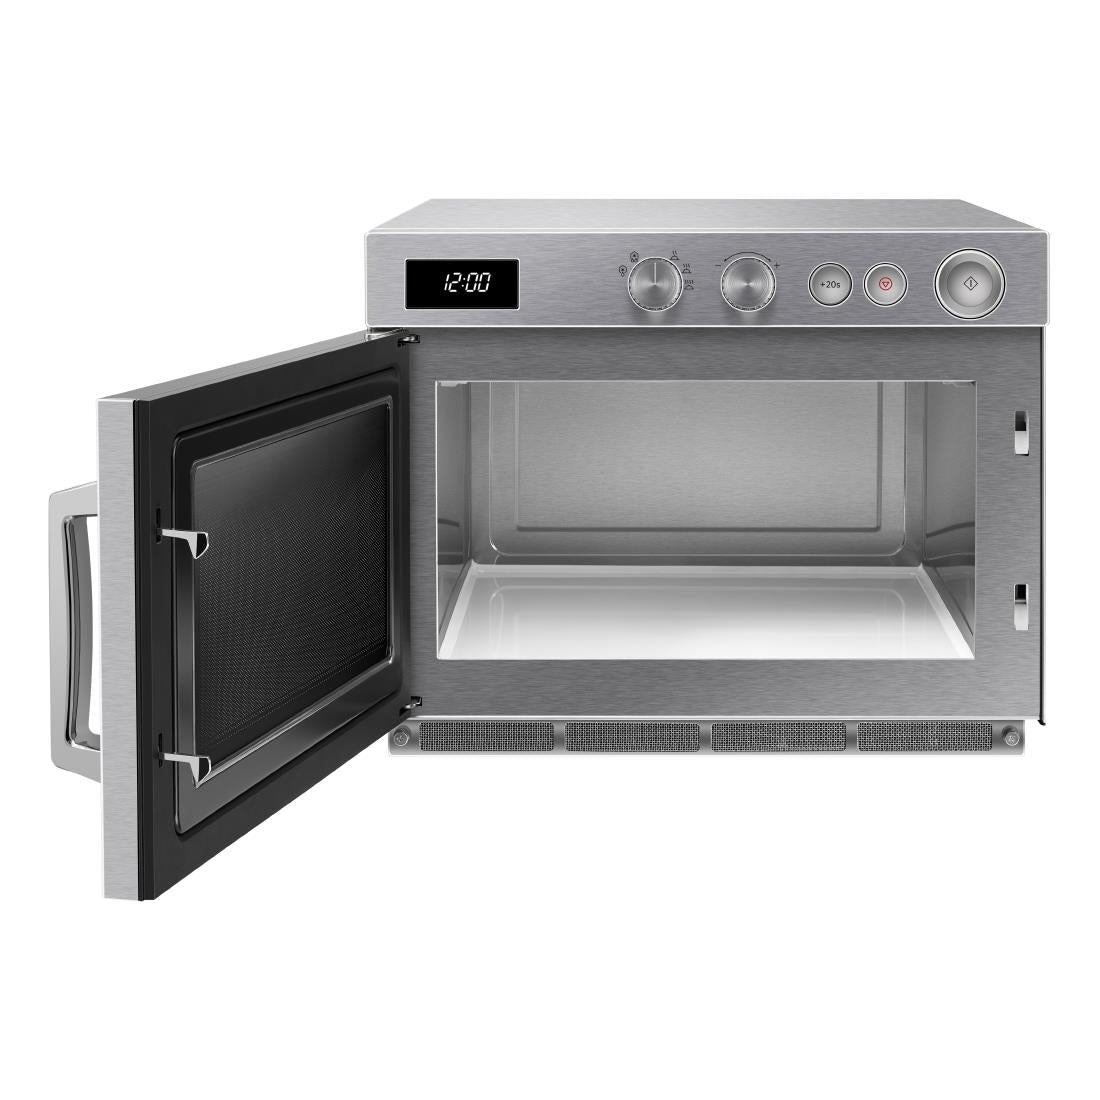 FS317 Samsung Manual Commercial Microwave 1500W FS317